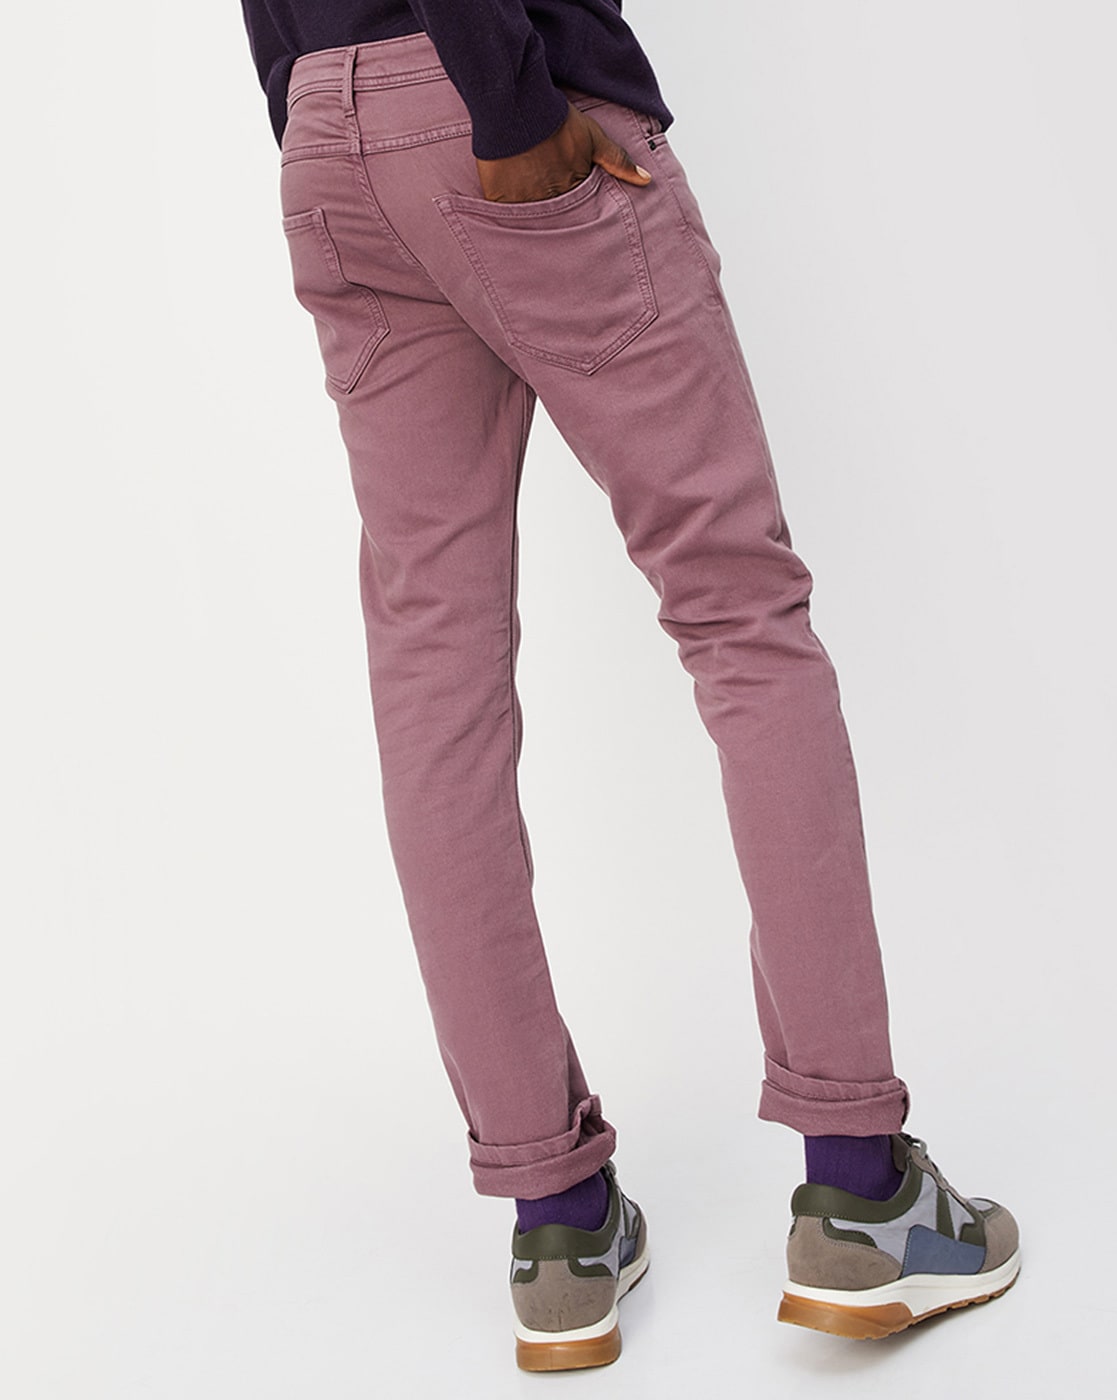 Purple Designer Mens Slim Fit Casual Topman Jeans Anti Aging, PU2023900,  Size 30 32 34 36 C47v 2023 Collection From Dealife, $27.48